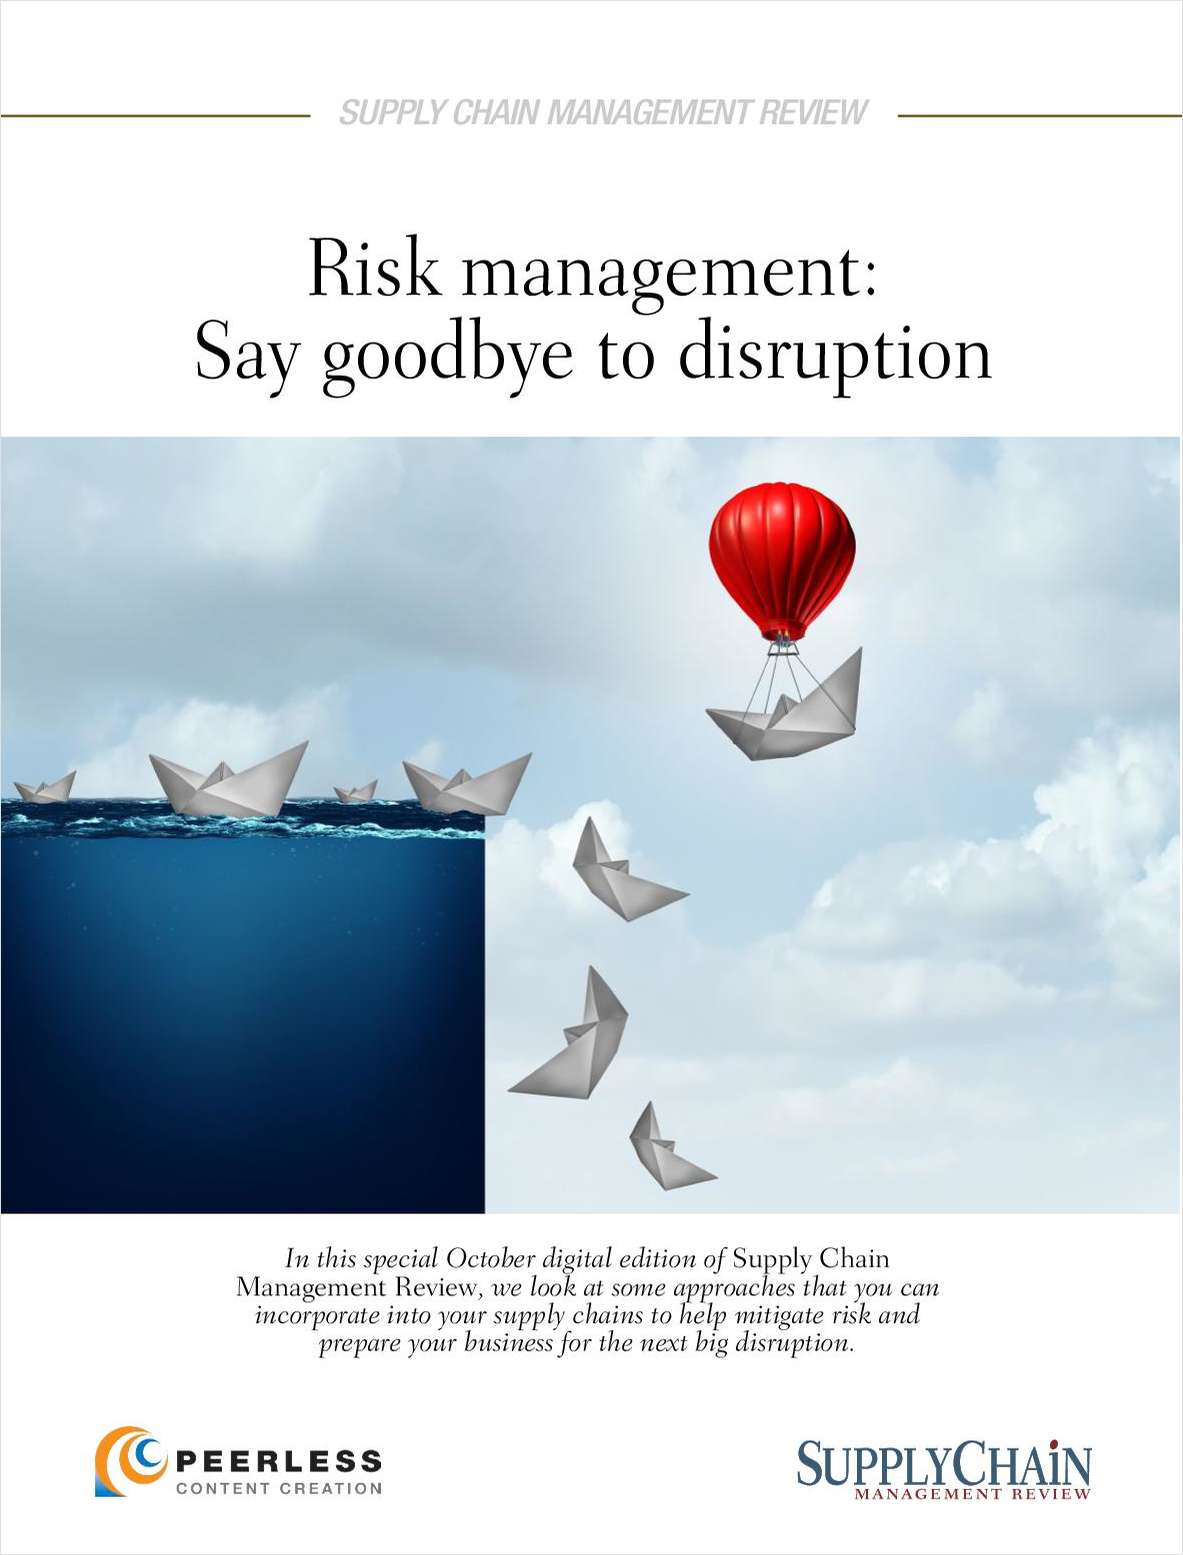 Risk management: Say goodbye to disruption